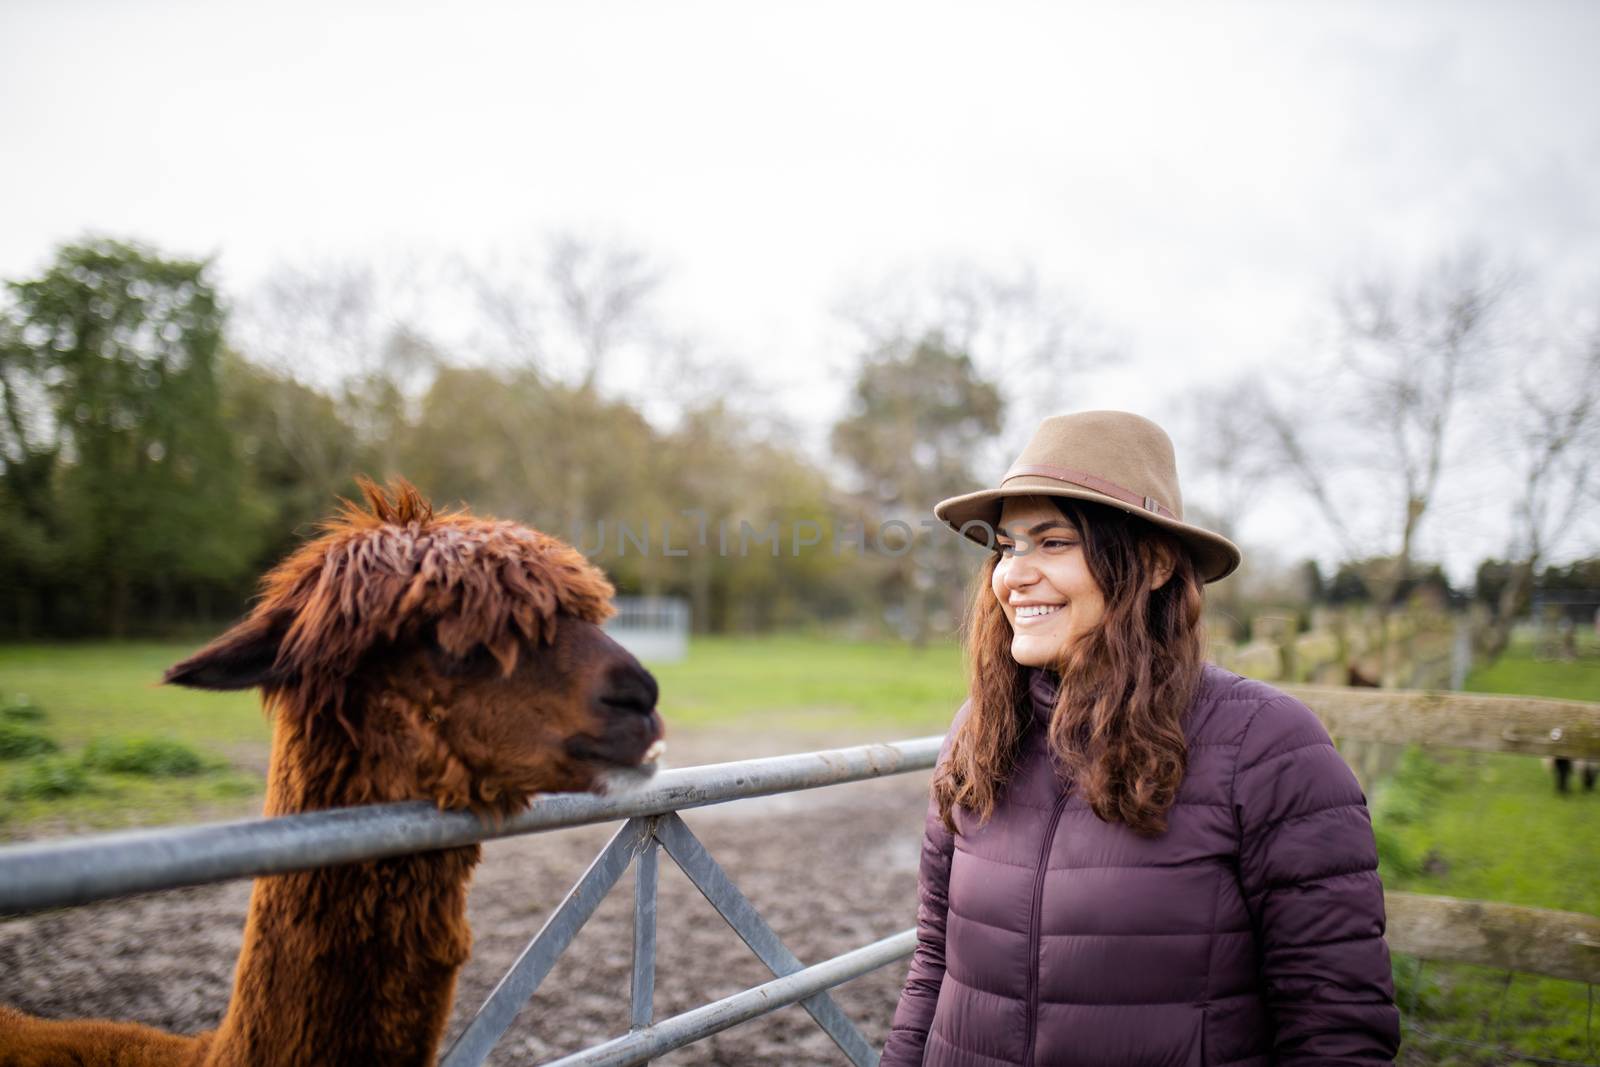 Smiling woman wearing a hat standing next to a brown alpaca behind a fence by Kanelbulle